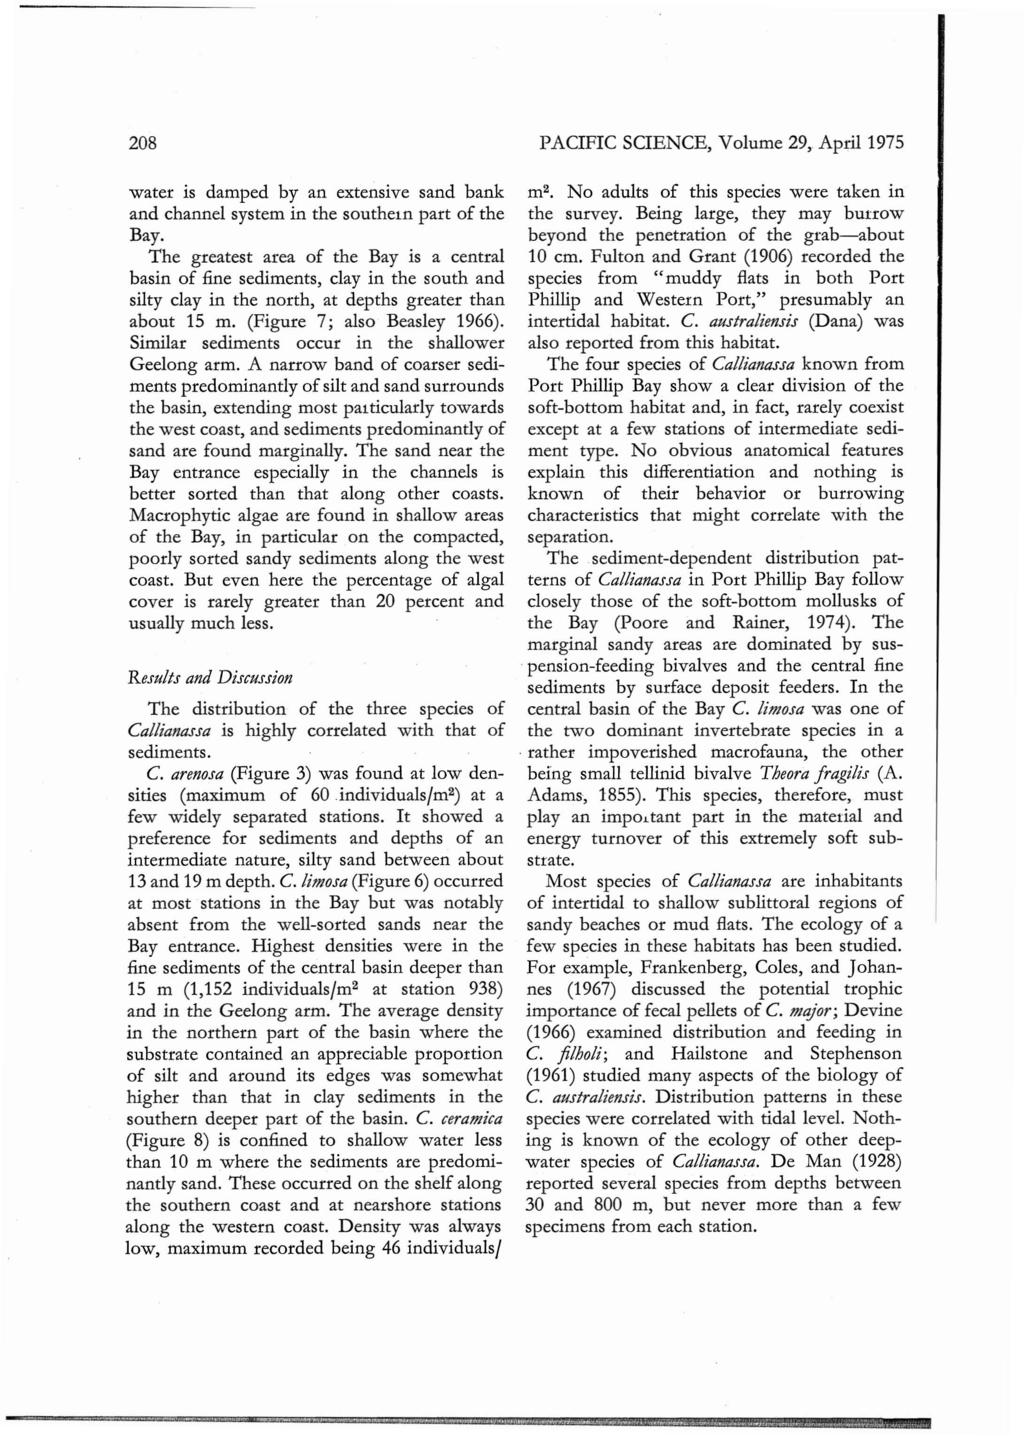 208 PACIFIC SCIENCE, Volume 29, April 1975 water is damped by an extensive sand bank and channel system in the southern part of the Bay.